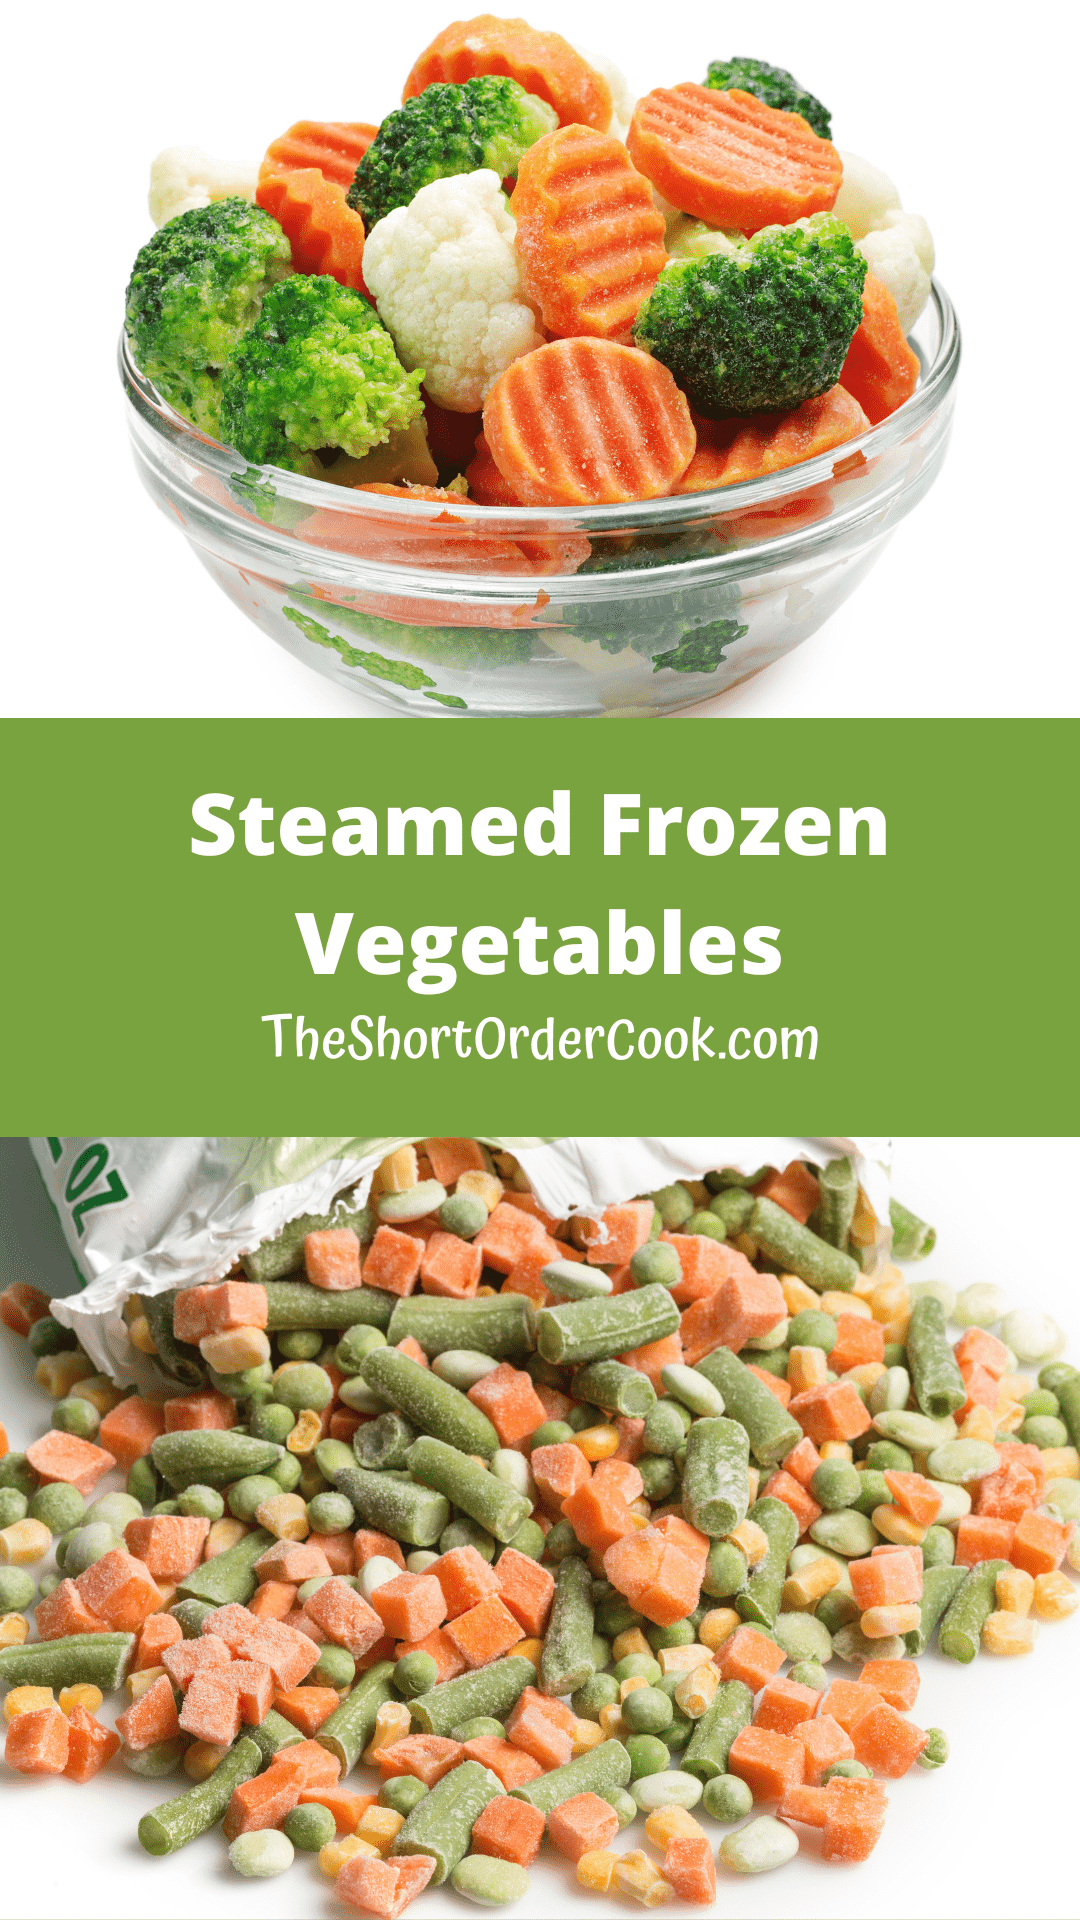 A bowl of steamed vegetables ready to eat and some frozen vegetables on a table scattered.